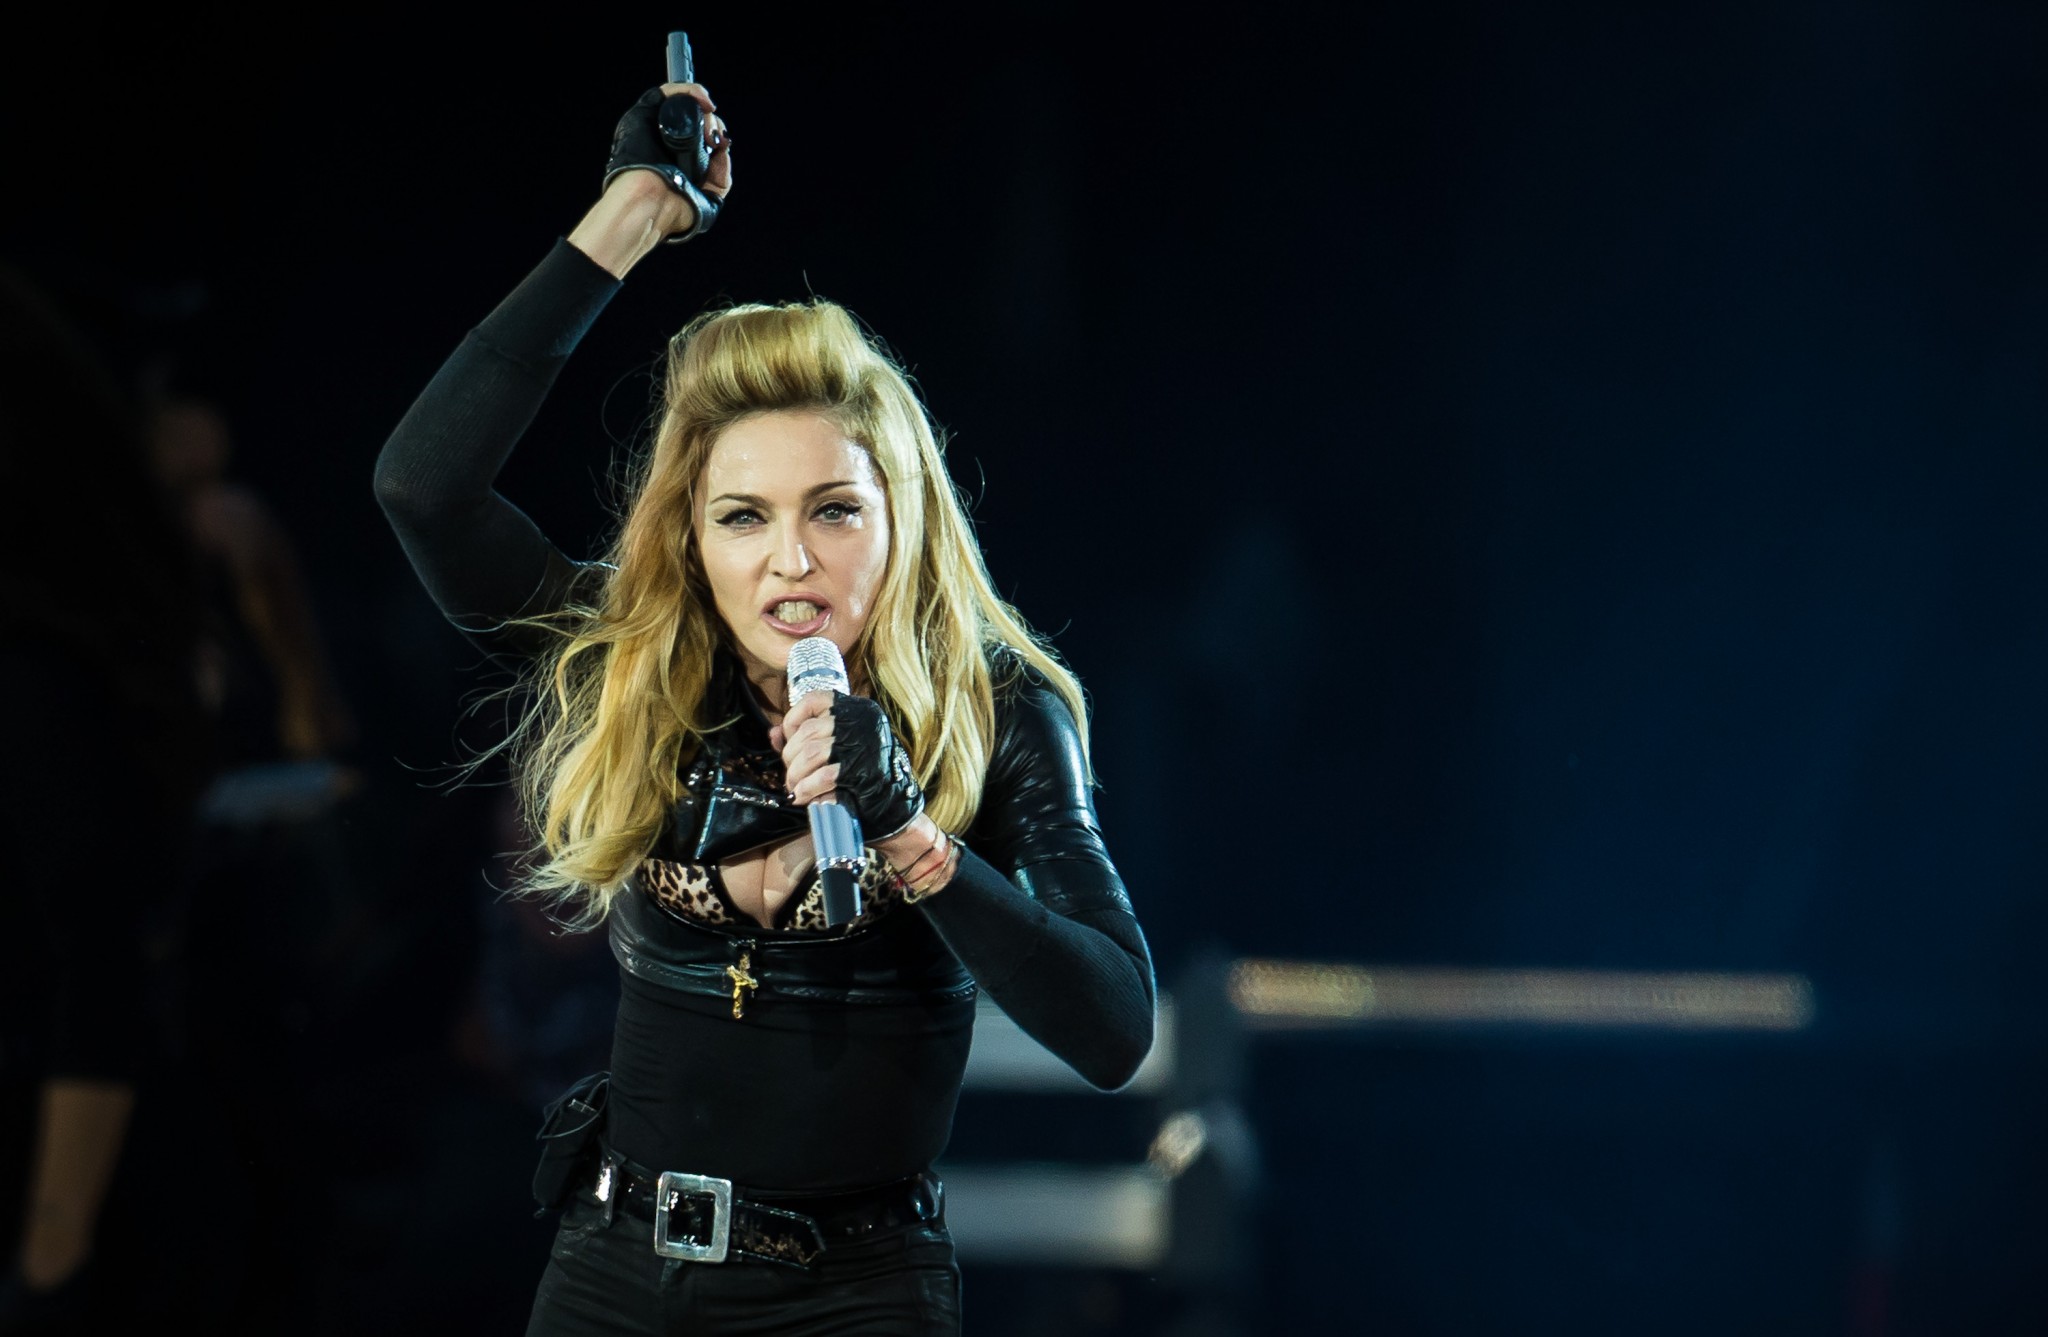 LONDON, ENGLAND - JULY 17: Madonna Performs live during the MDNA tour at Hyde Park on July 17, 2012 in London, England. (Photo by Ian Gavan/Getty Images)